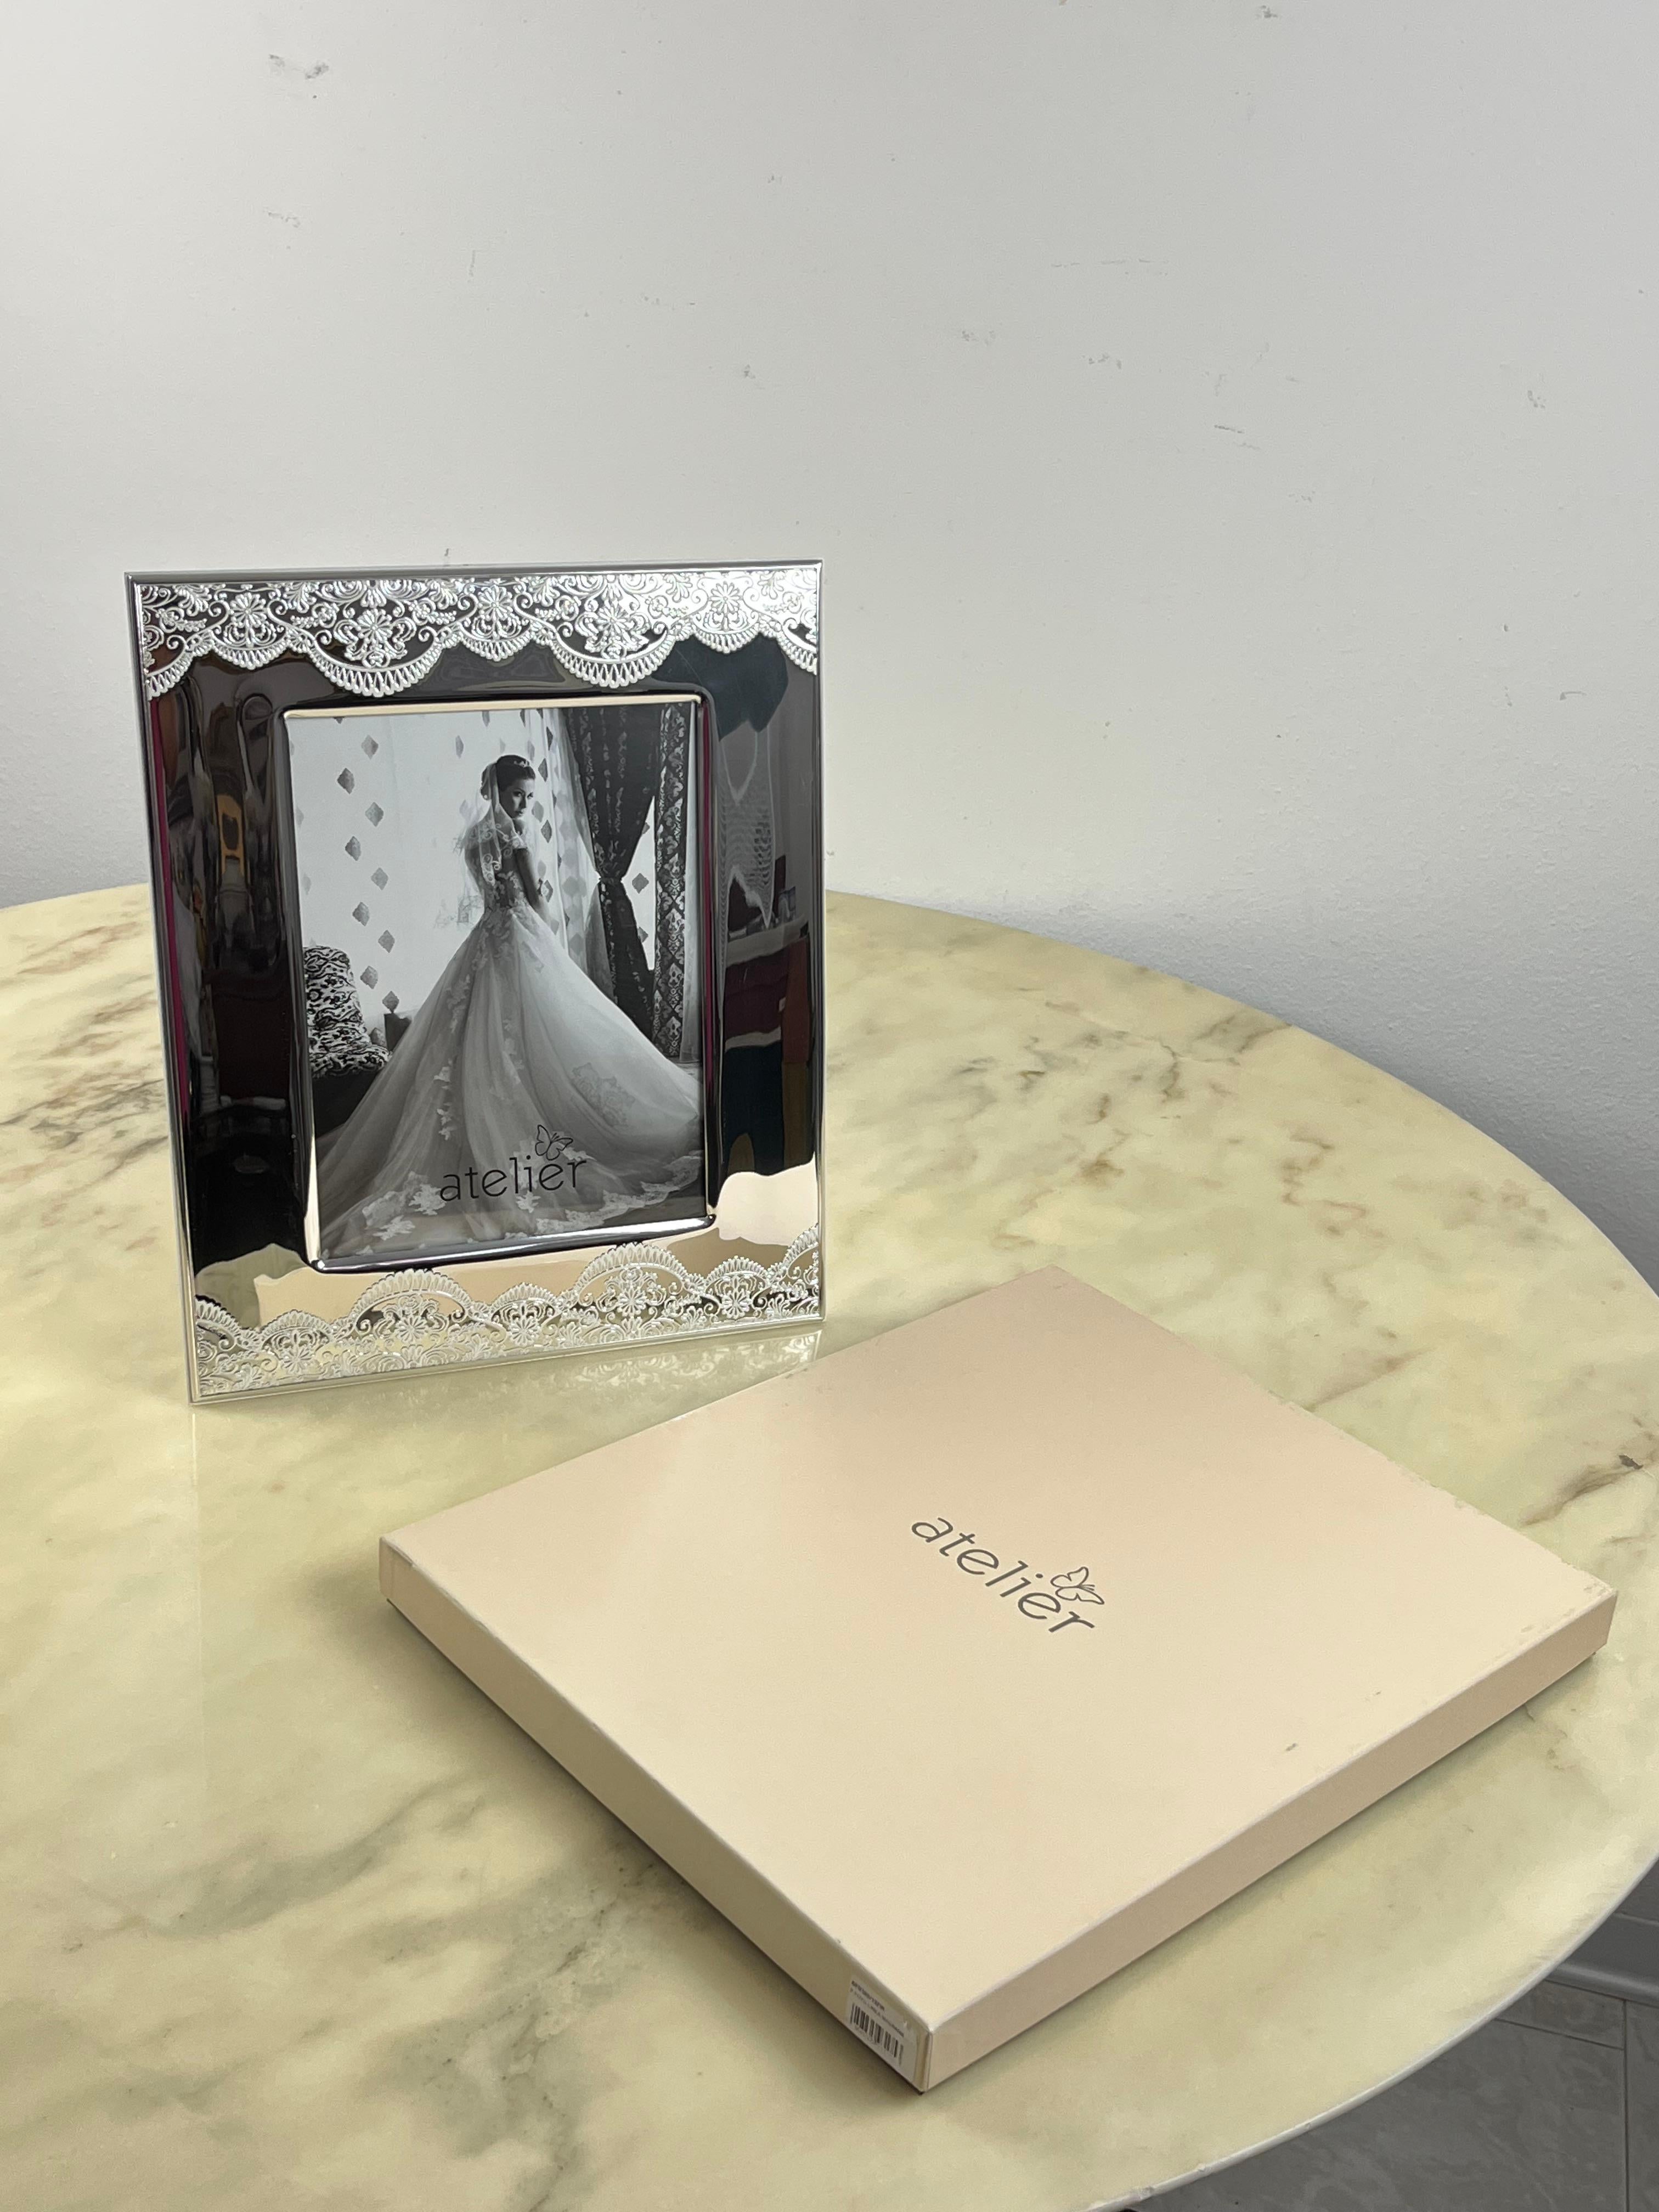 Contemporary Silver Plate Photo Frame/Mirror, lace design, new For Sale